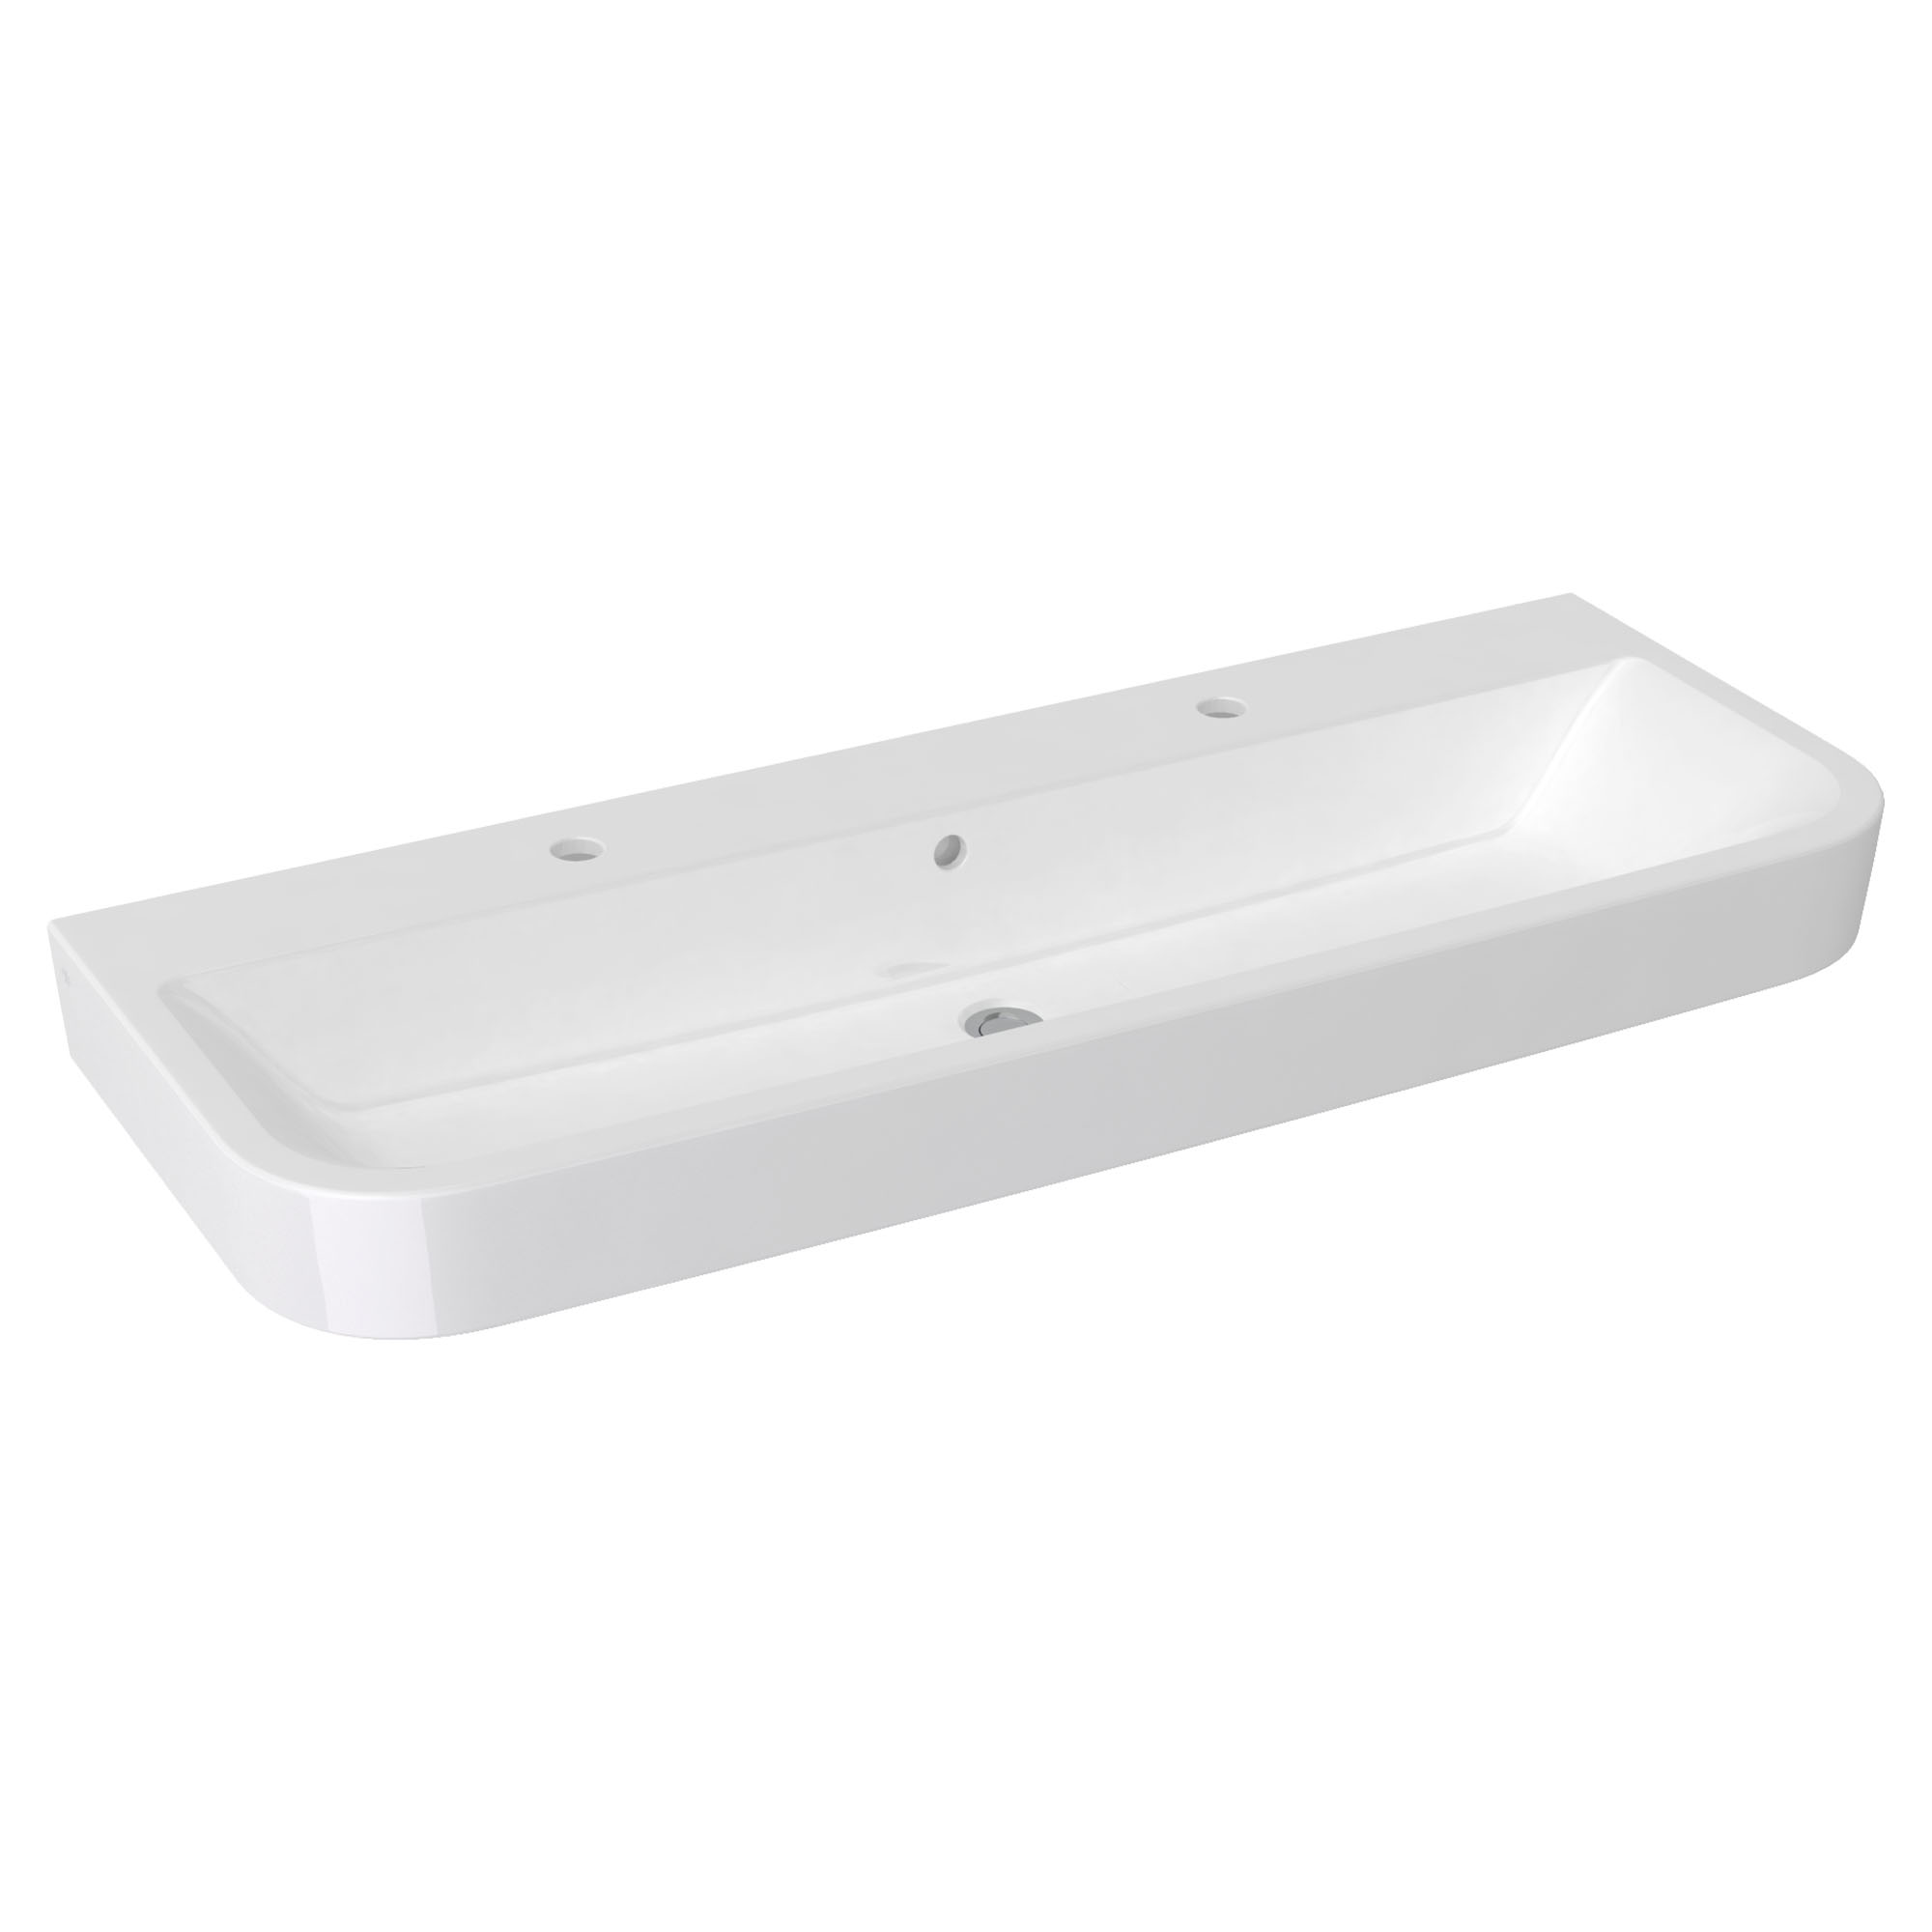 Equility® Wall-Hung Sink, 2 Single Hole